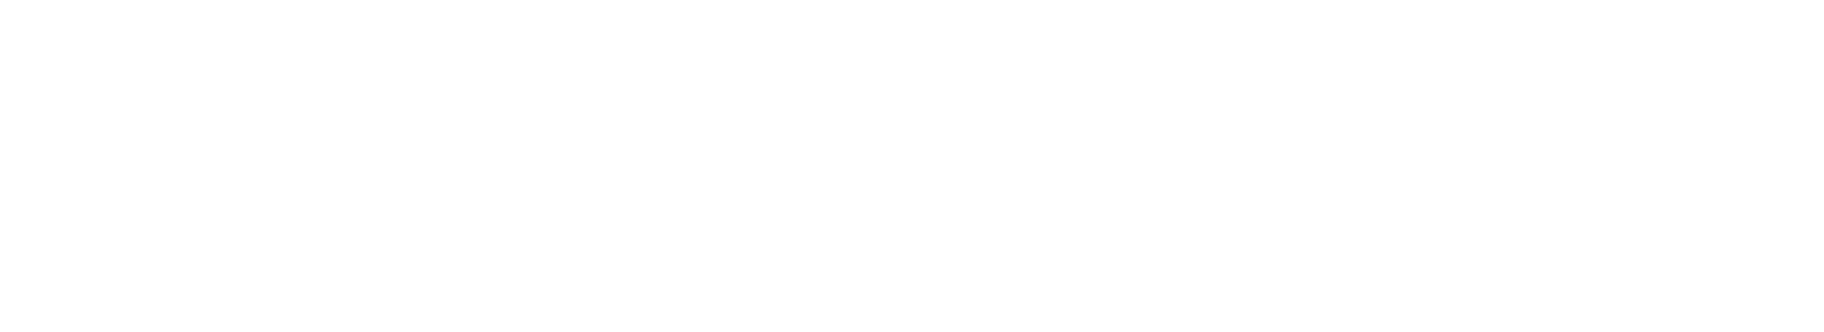 Please enjoy the star chef’s (learned at Michelin restaurant in France) dishes in your house and office